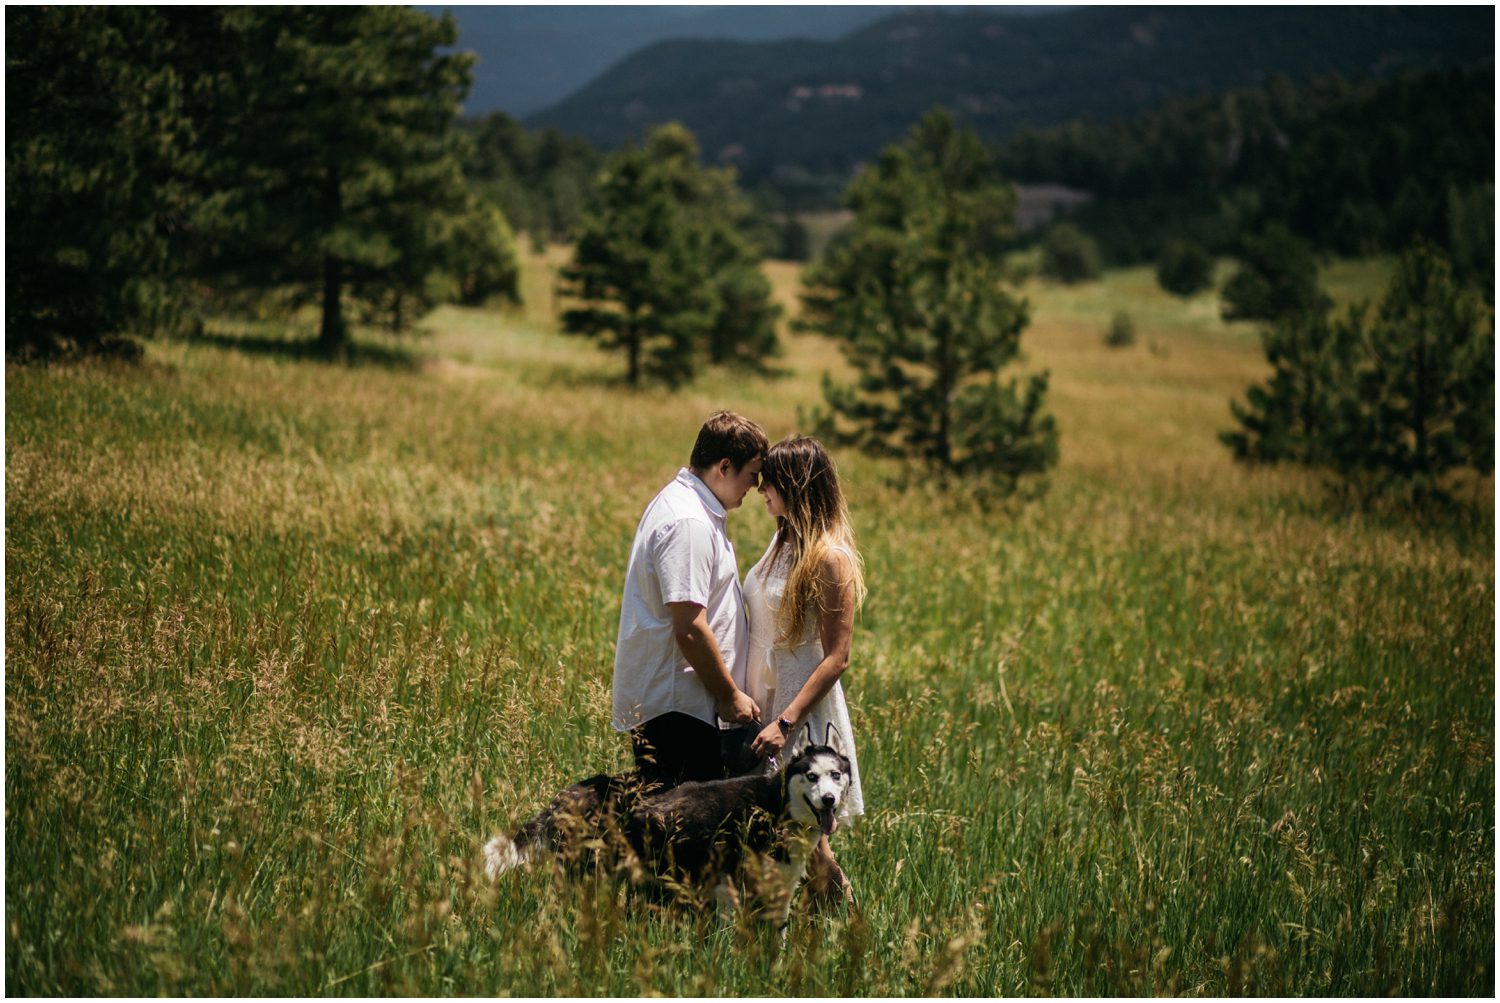 Evergreen Colorado Engagement Photos, Elk Meadow Open Space, Engagement Session locations Colorado